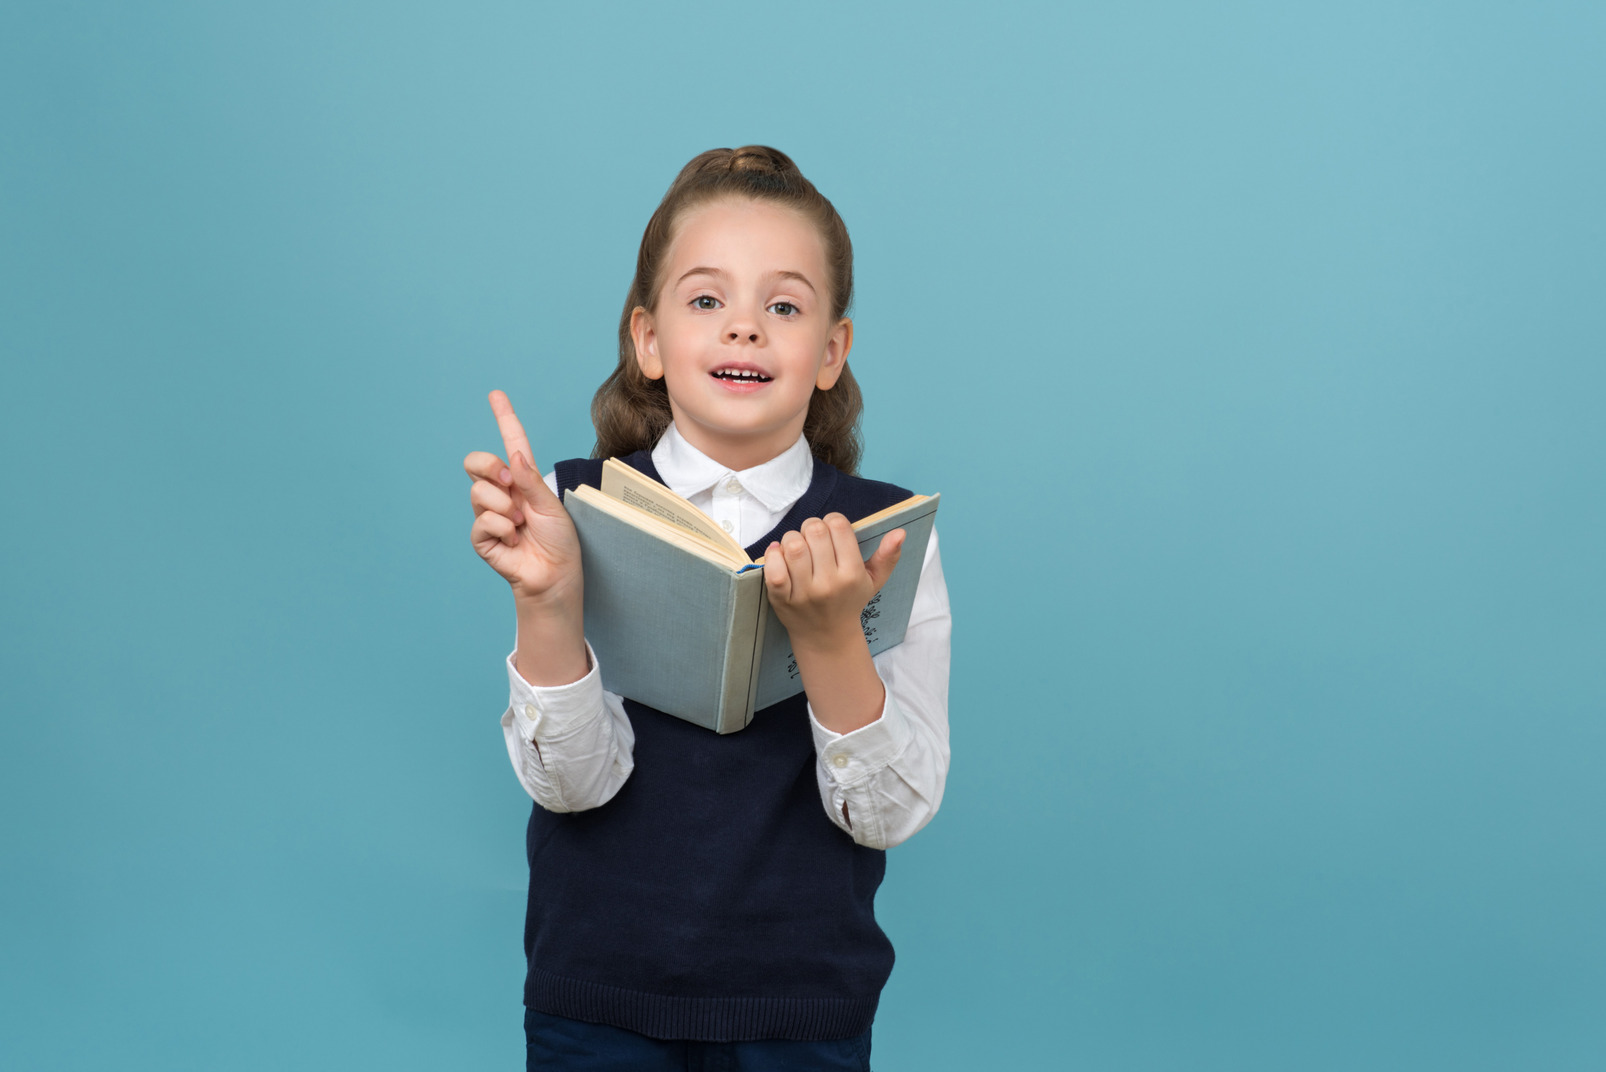 Primary schoolgirl holding an opened book and finger up